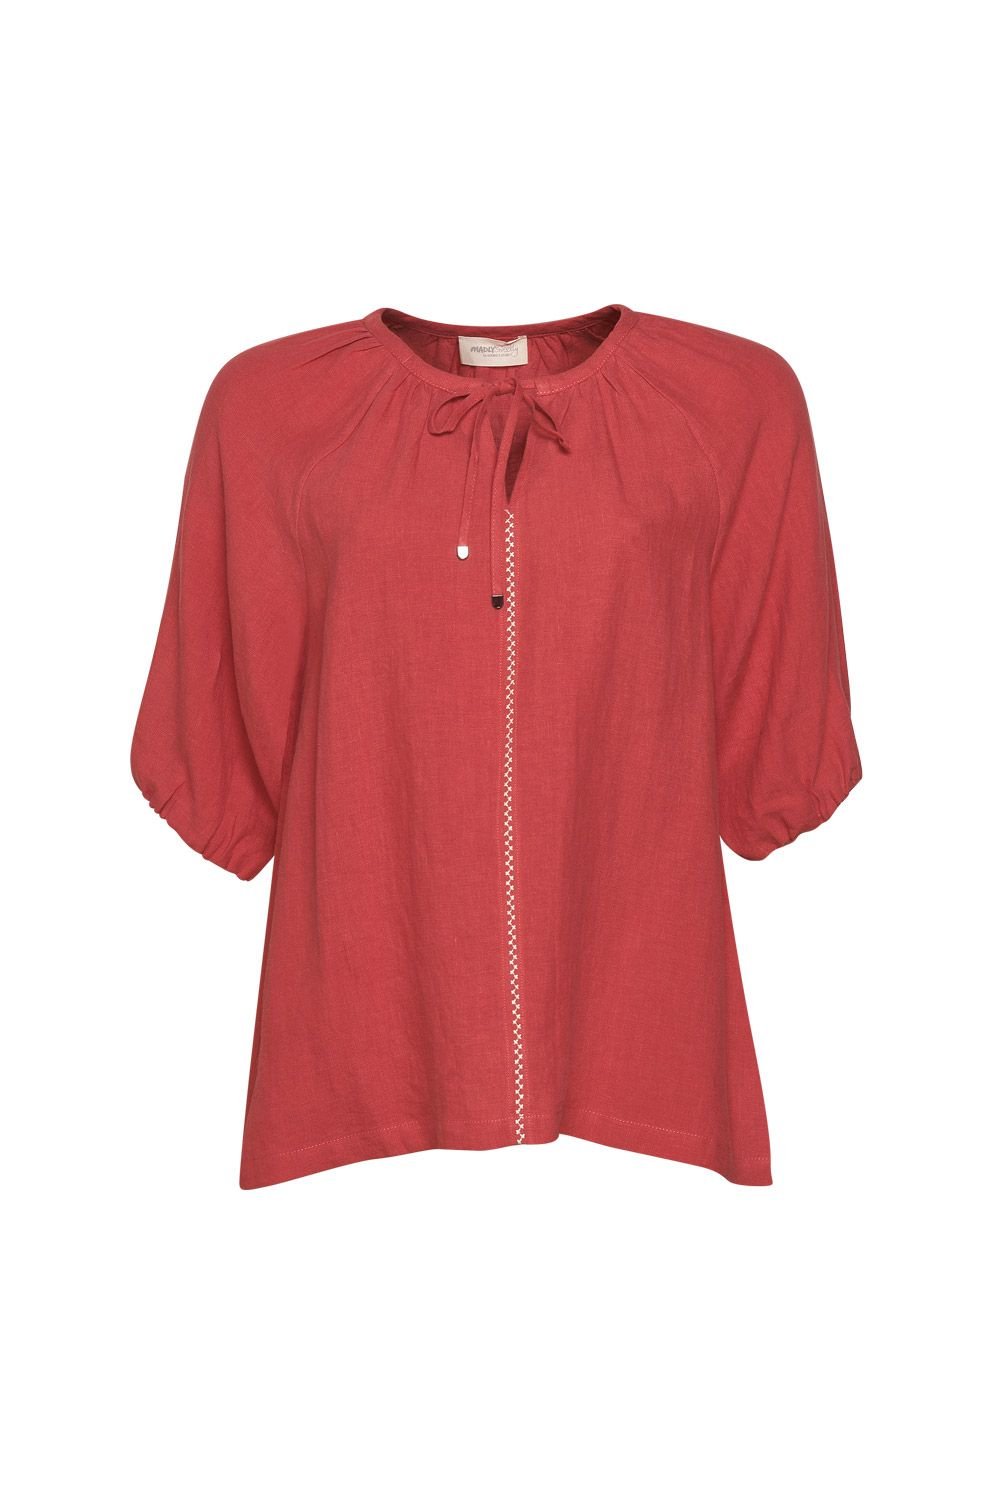 Shop Whisper Blouse | Cranberry - Madly Sweetly